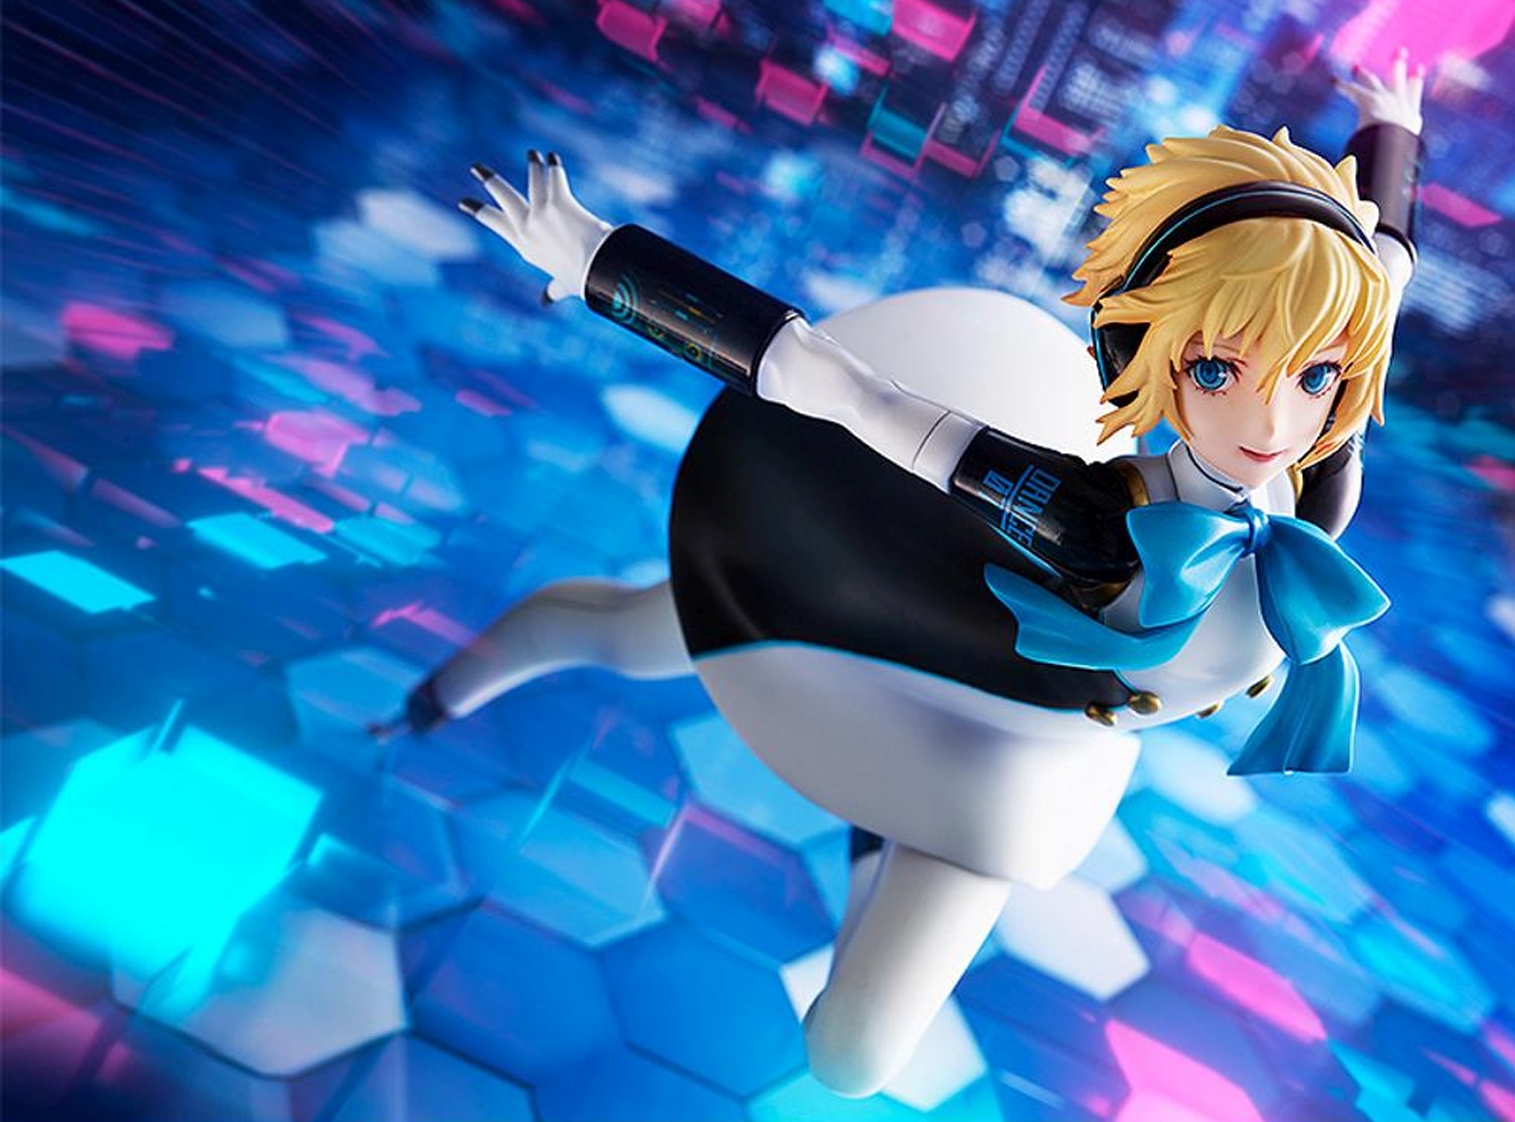 Good Smile Company Announces Persona 3: Dancing In Moonlight Aigis Statue For Release Next Year